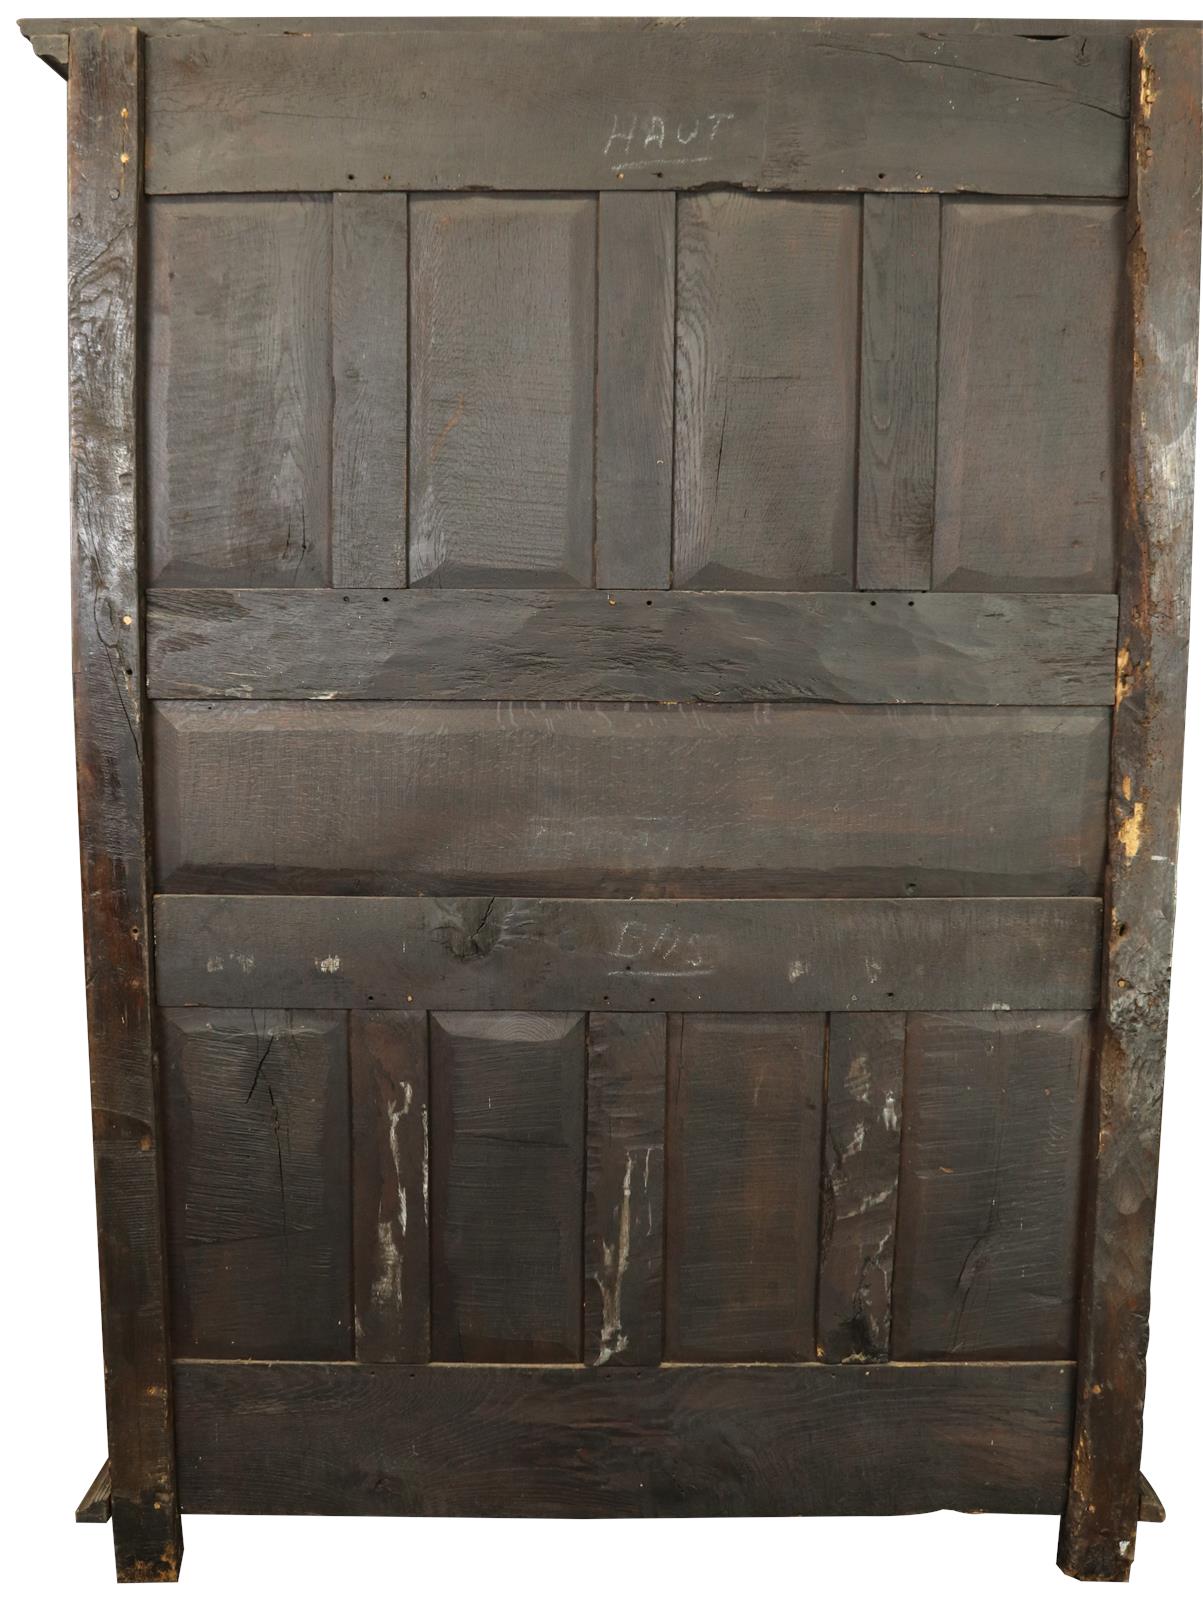 Armoire Antique French Provincial Very Old 1790 Oak Wood Peg Construction Heart -Image 13